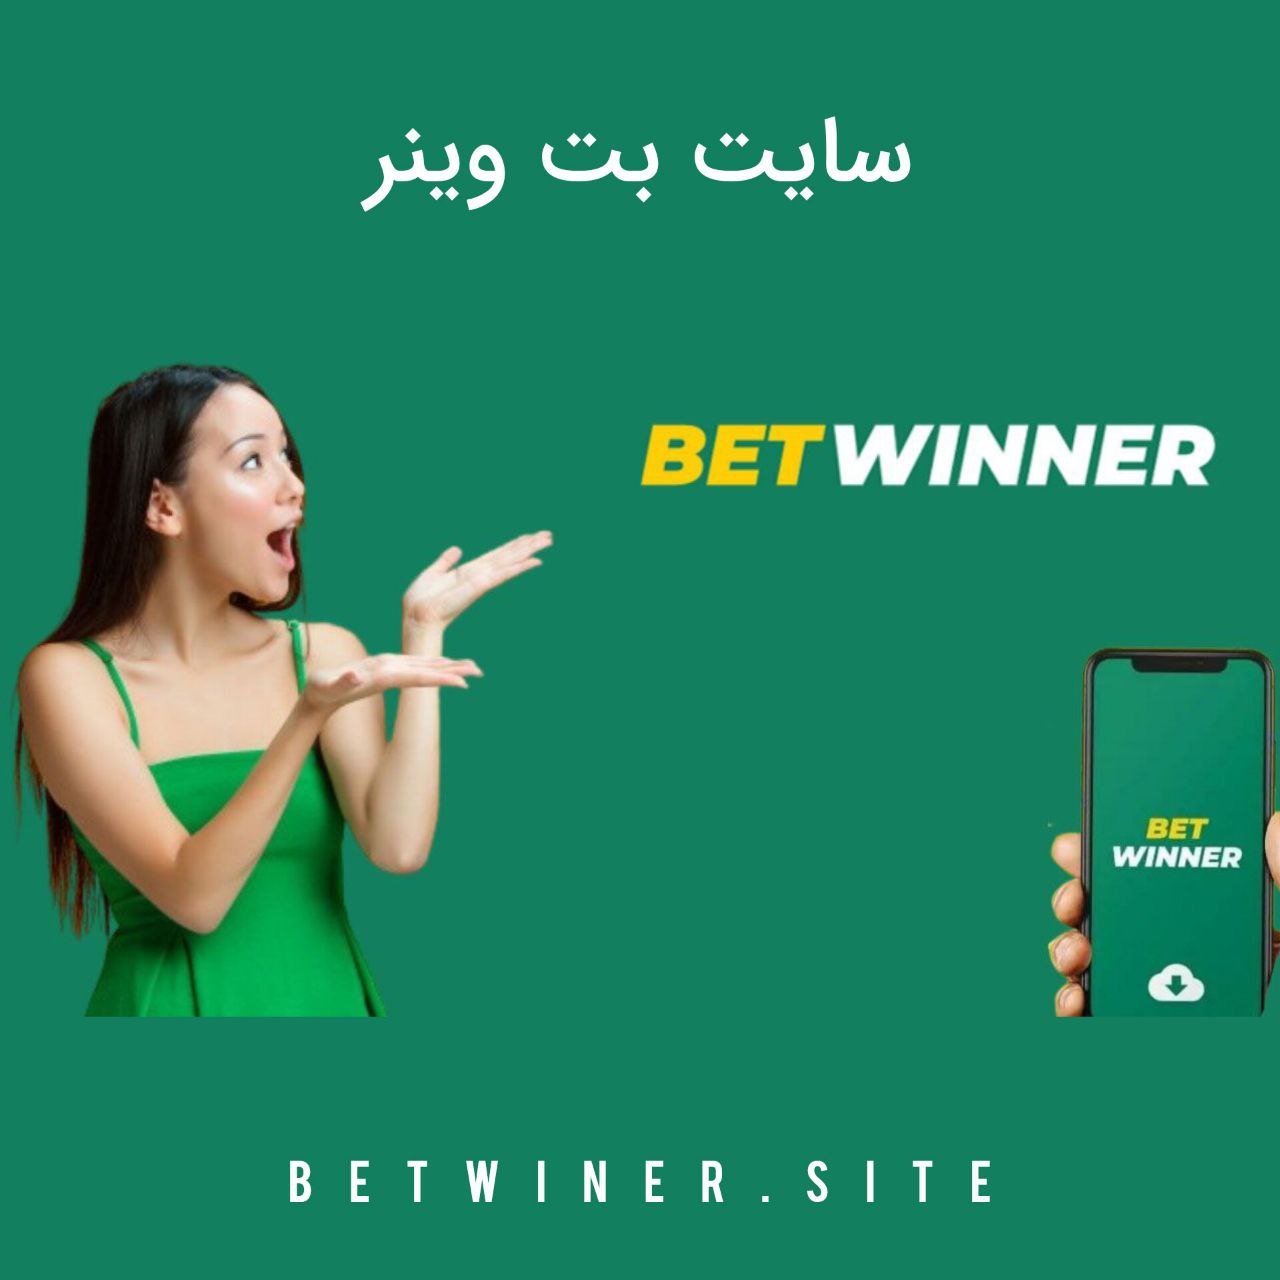 3 Kinds Of http://betwinner-rw.com/betwinner-download/: Which One Will Make The Most Money?